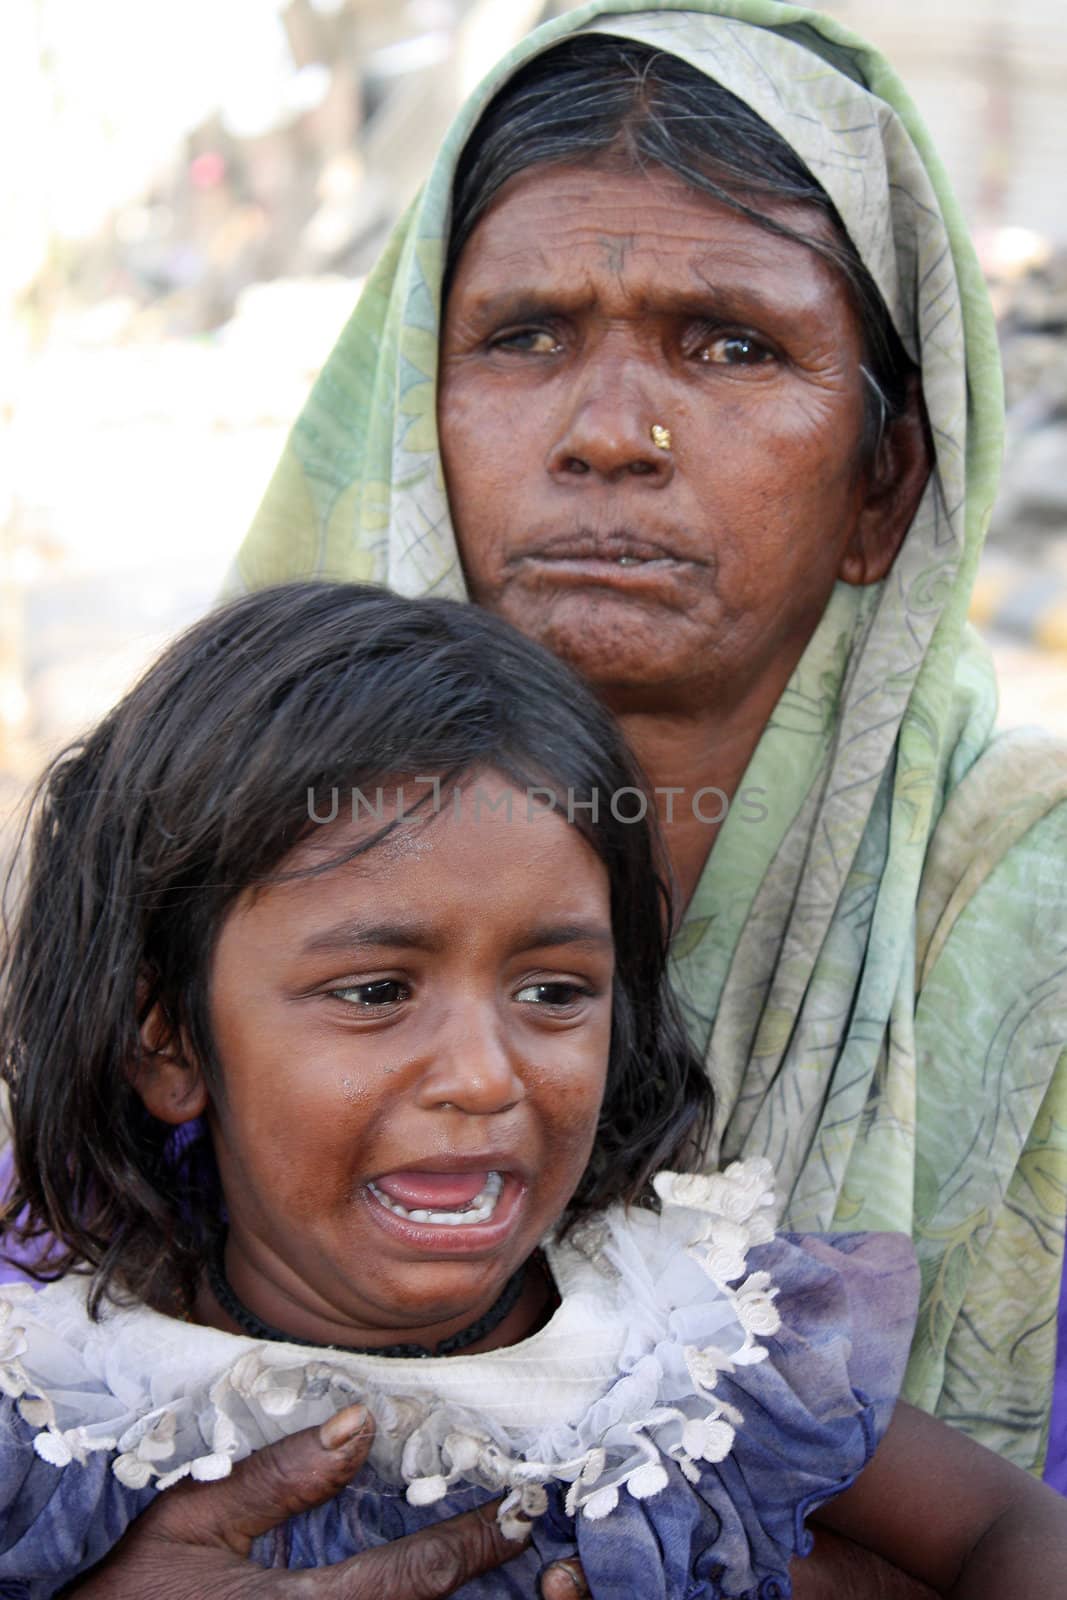 A portrait of a crying daughter with her grandmother in poor parts of India.